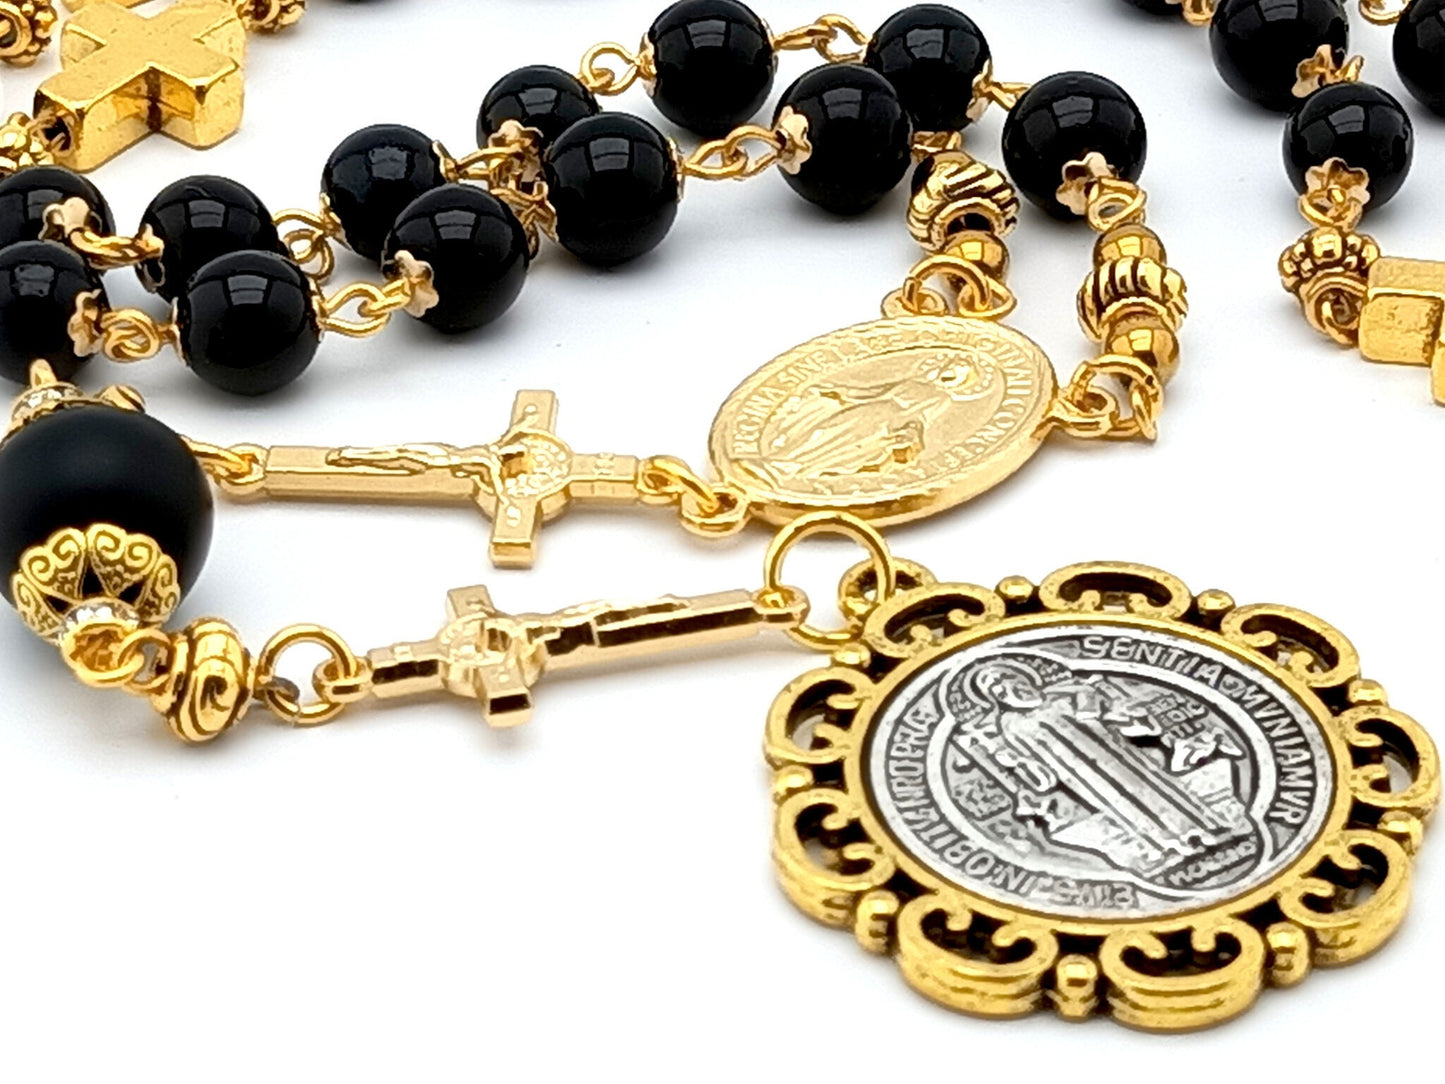 Saint Benedict unique rosary beads prayer chaplet with black and gold beads, medals and linking crucifixes.